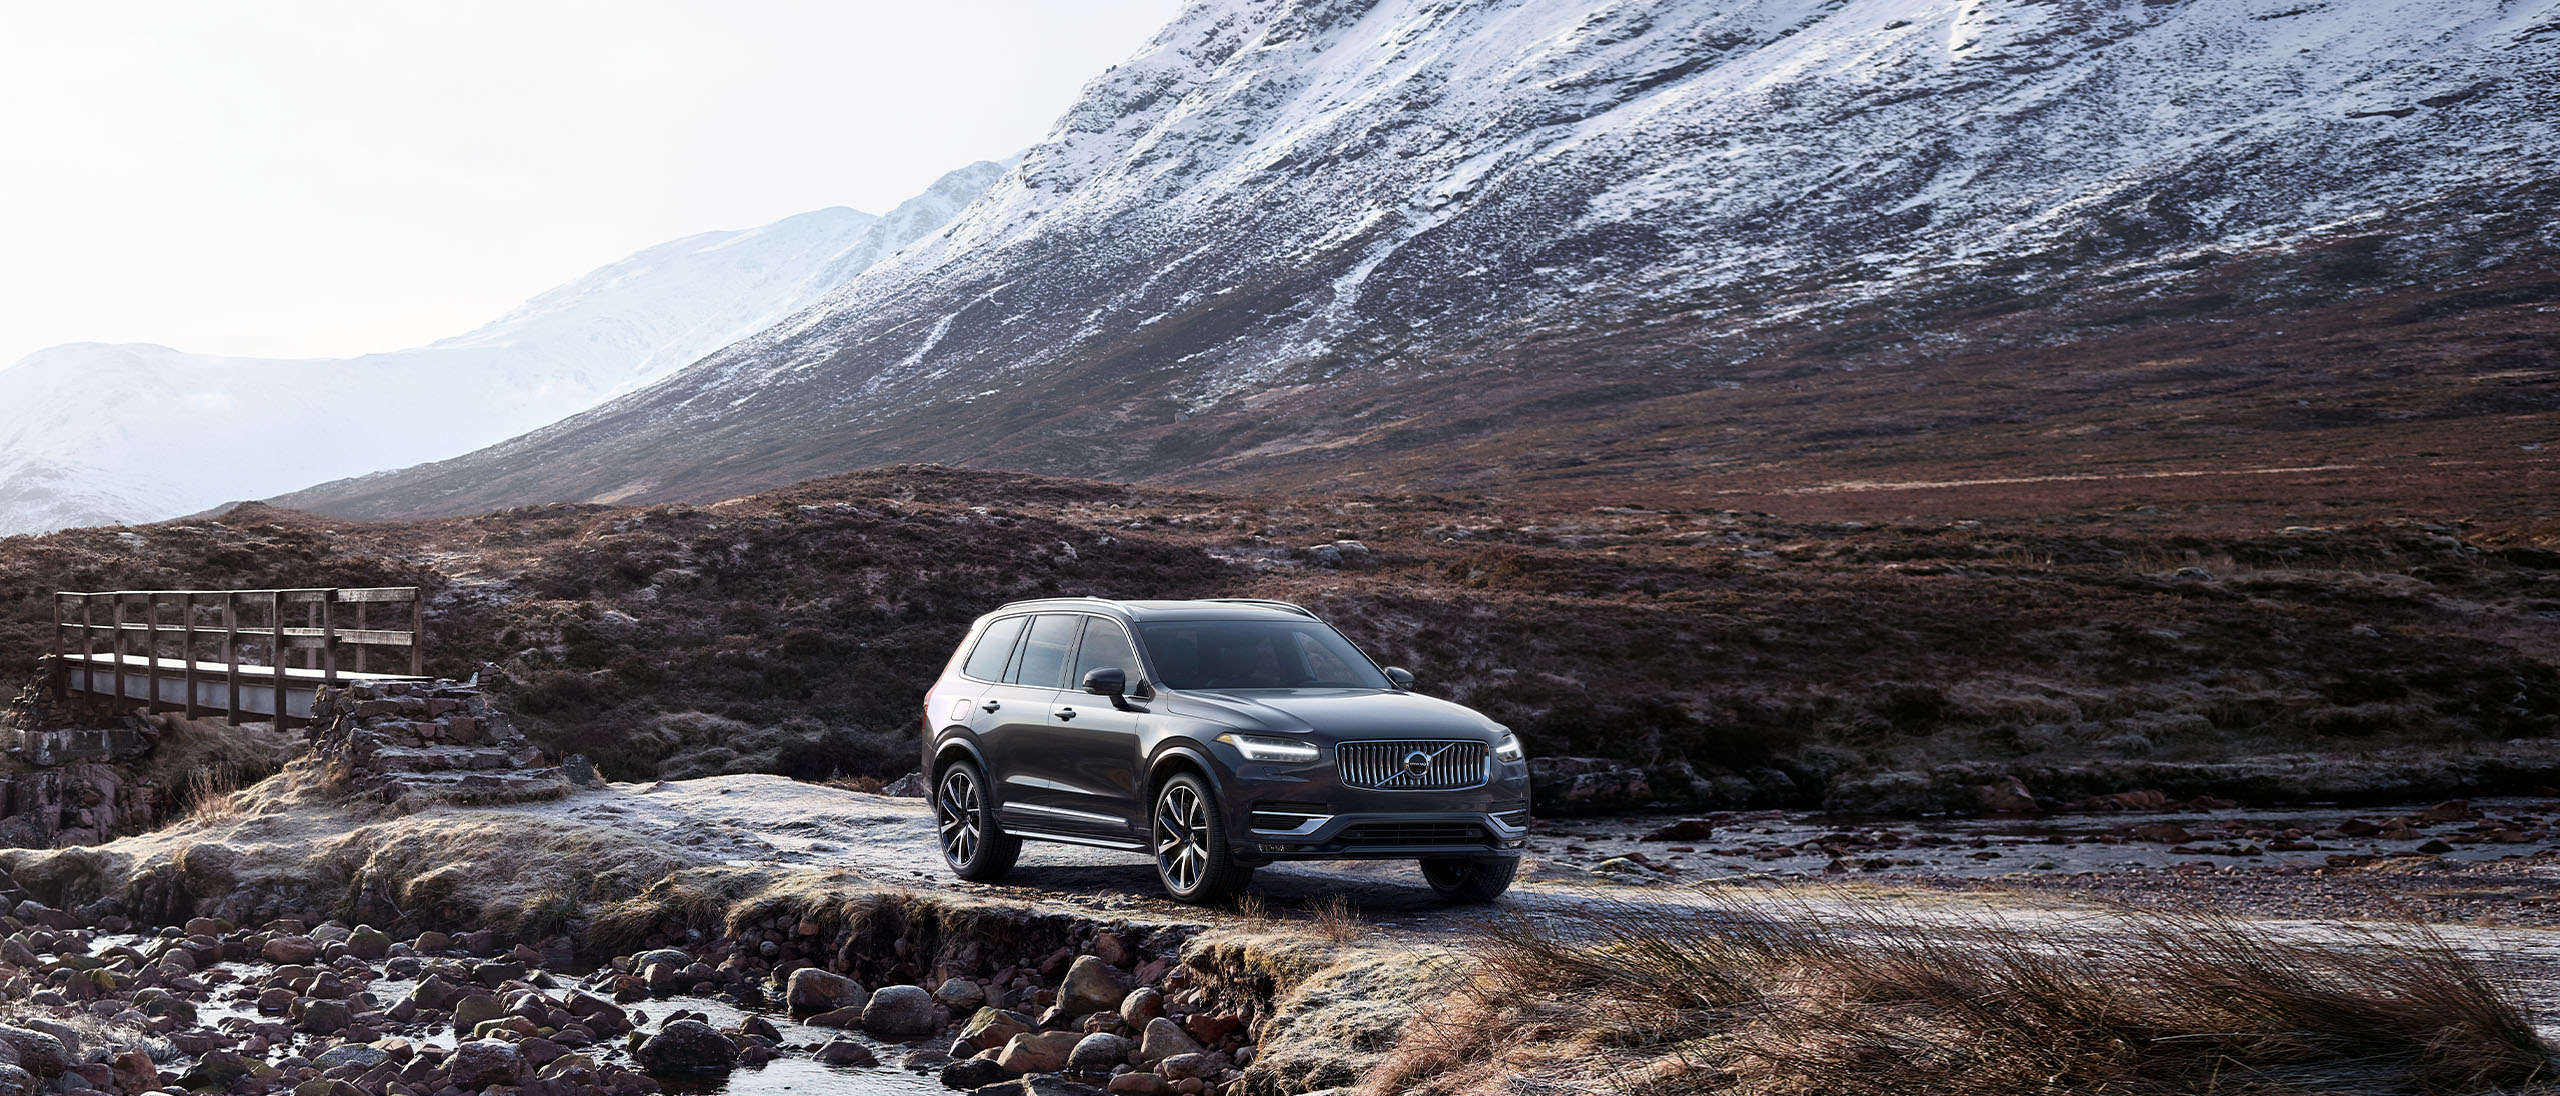 Volvo Cars Holiday Safely Sales Event – Volvo XC90 parked in snowy mountain range